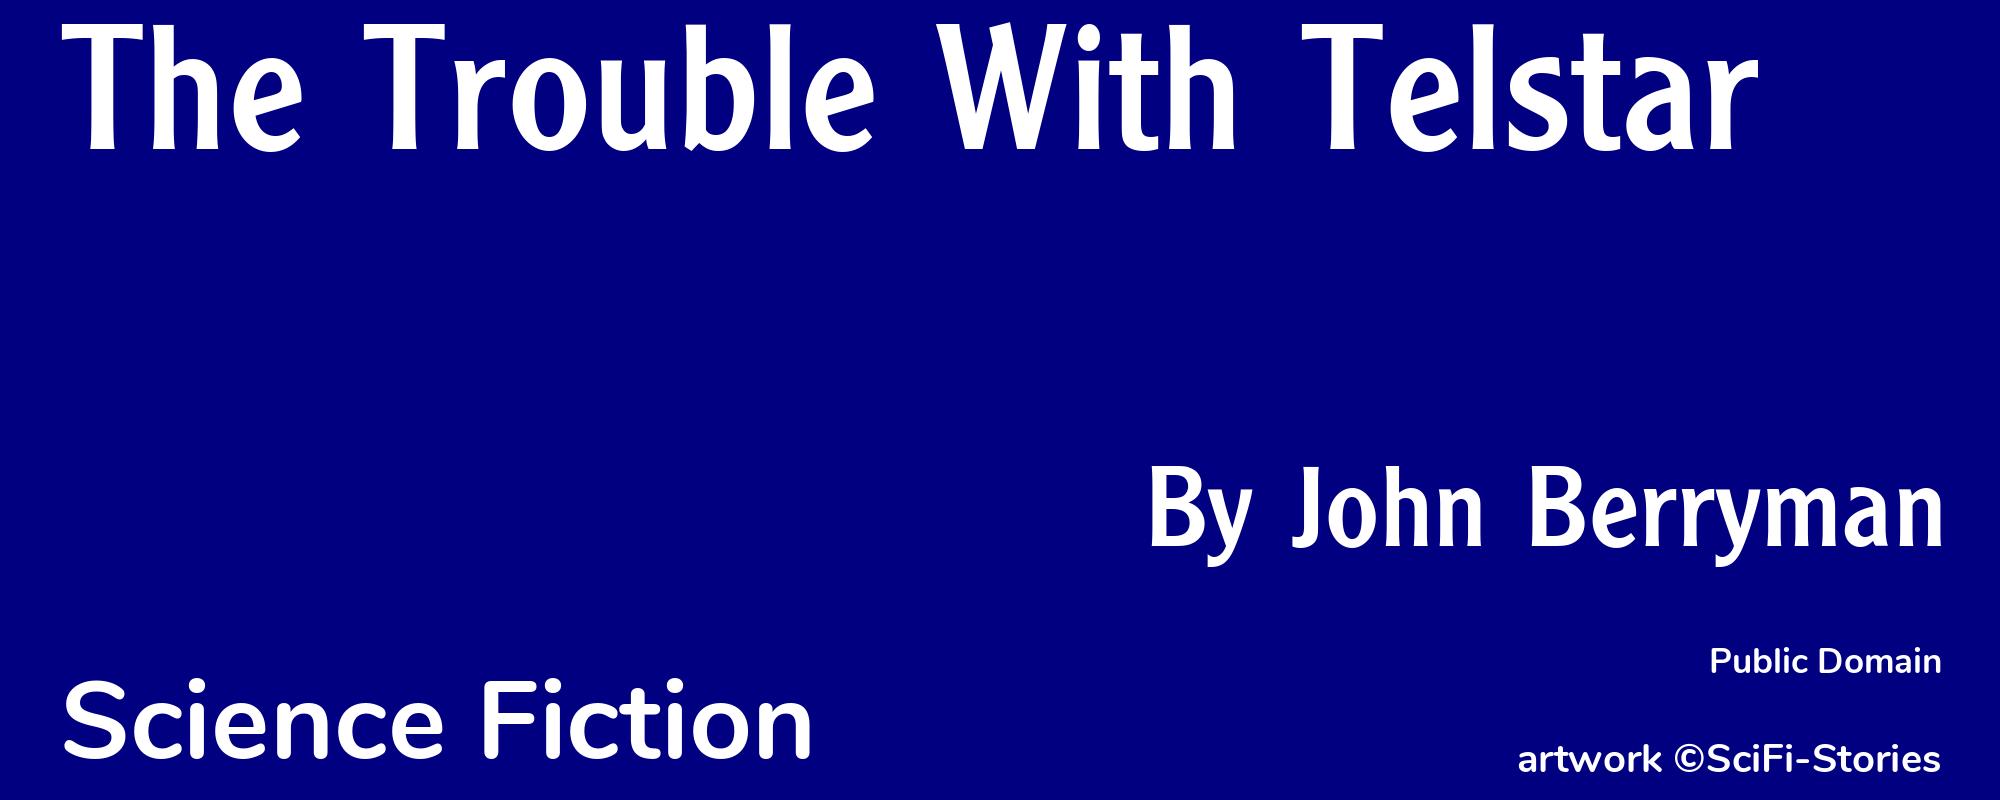 The Trouble With Telstar - Cover